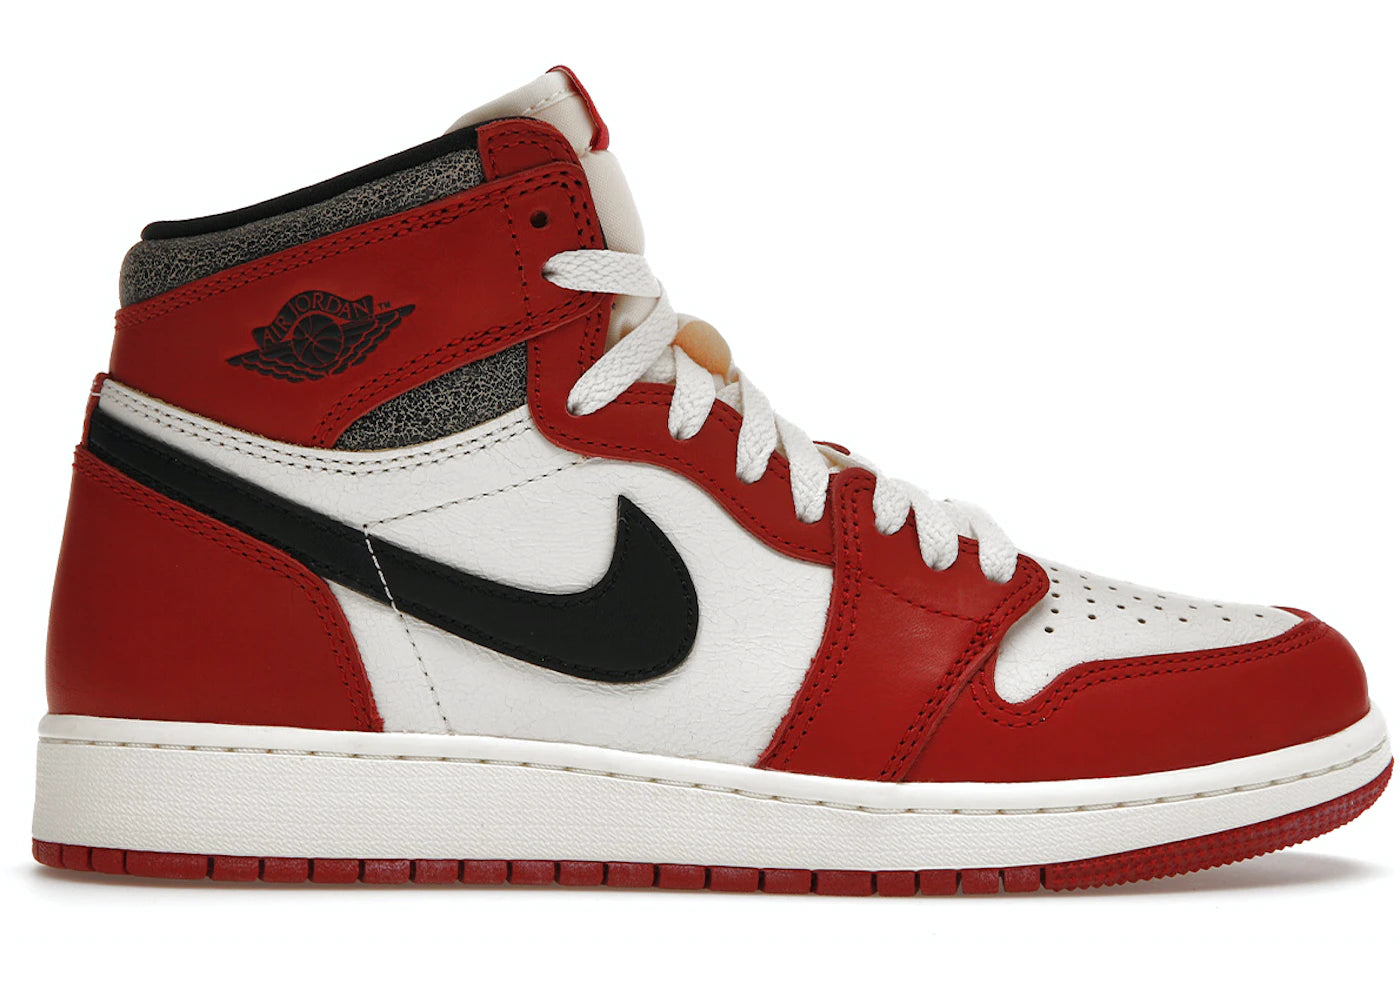 GS Jordan 1 Retro High OG Chicago Lost and Found